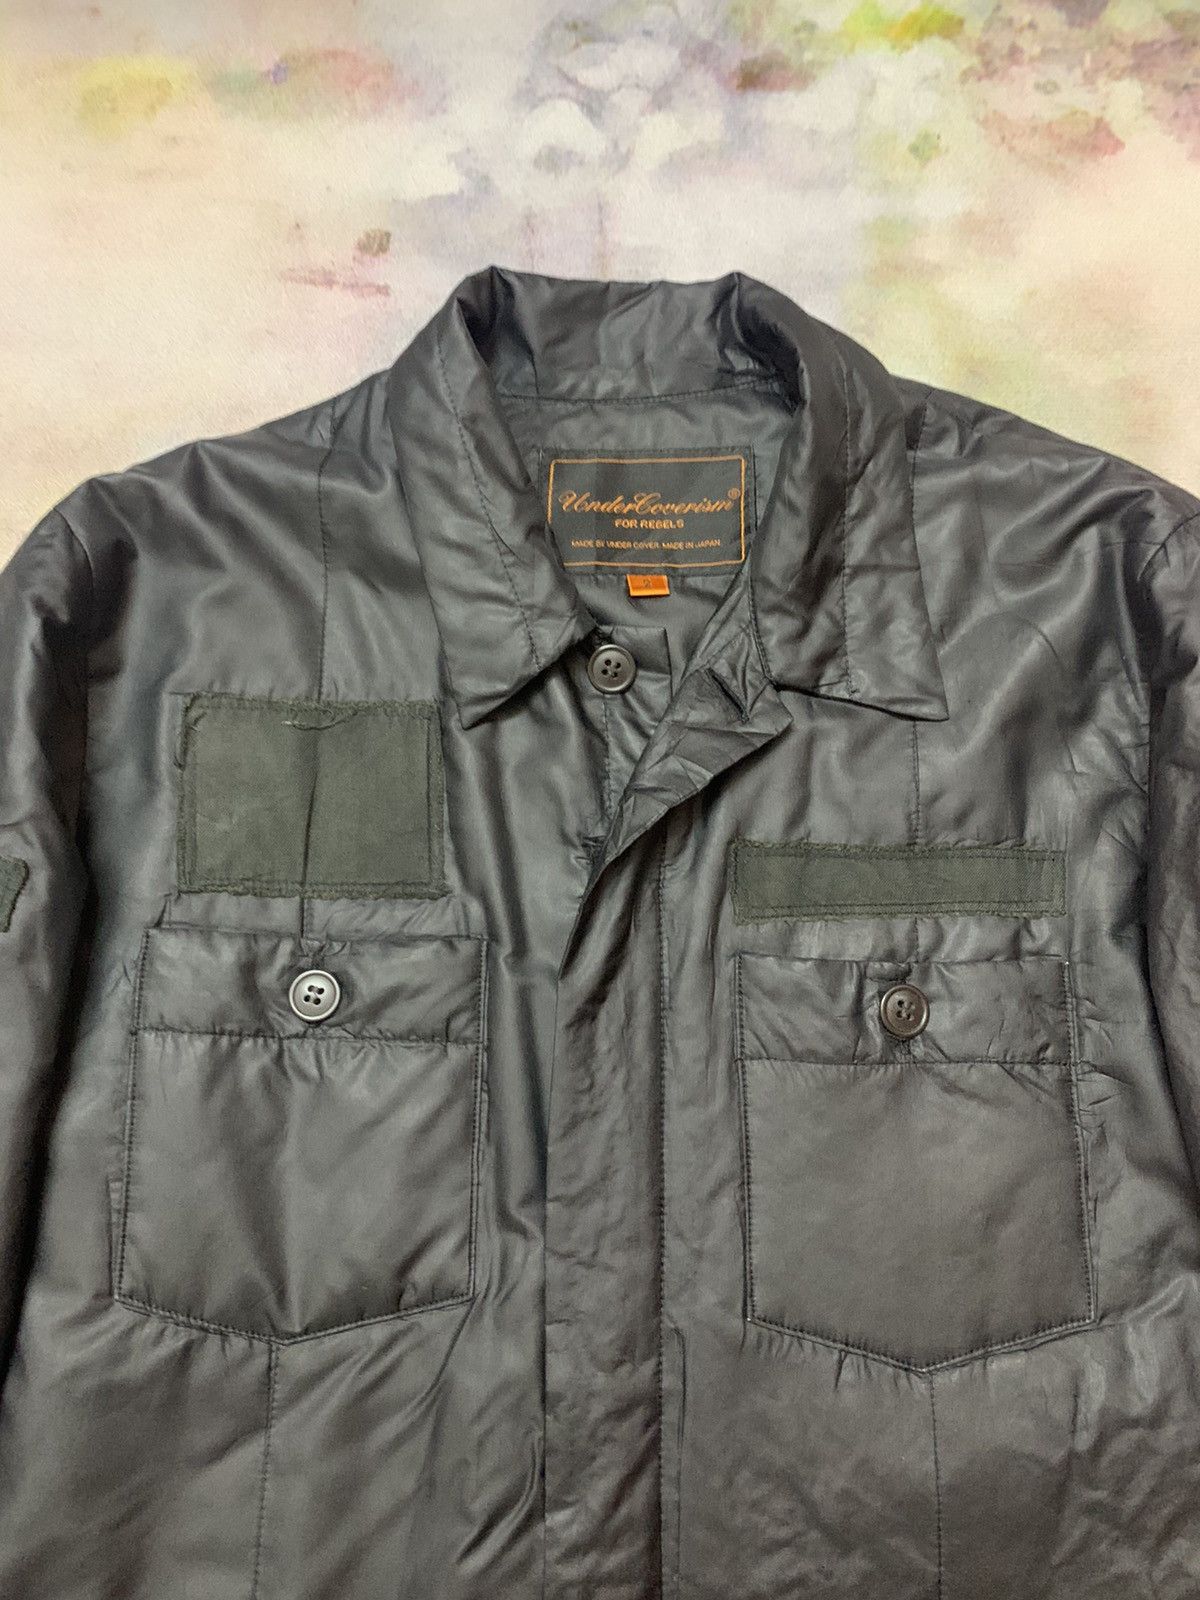 AW05 Undercover Arts and Crafts Jacket - 5